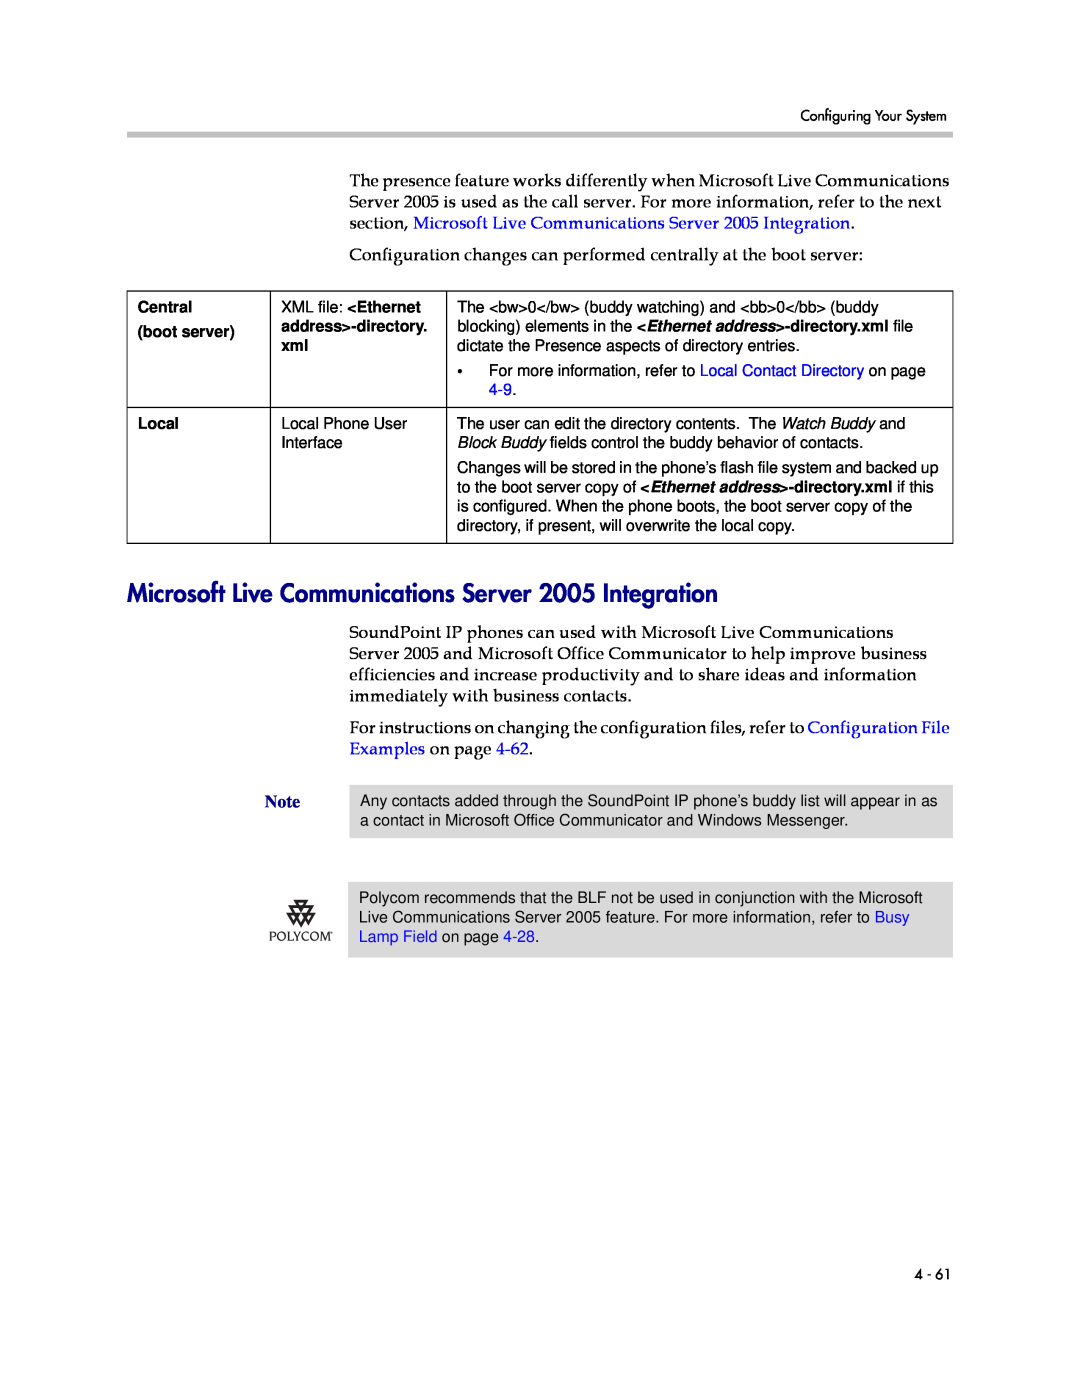 Polycom SIP 3.1 manual Microsoft Live Communications Server 2005 Integration, Examples on page 